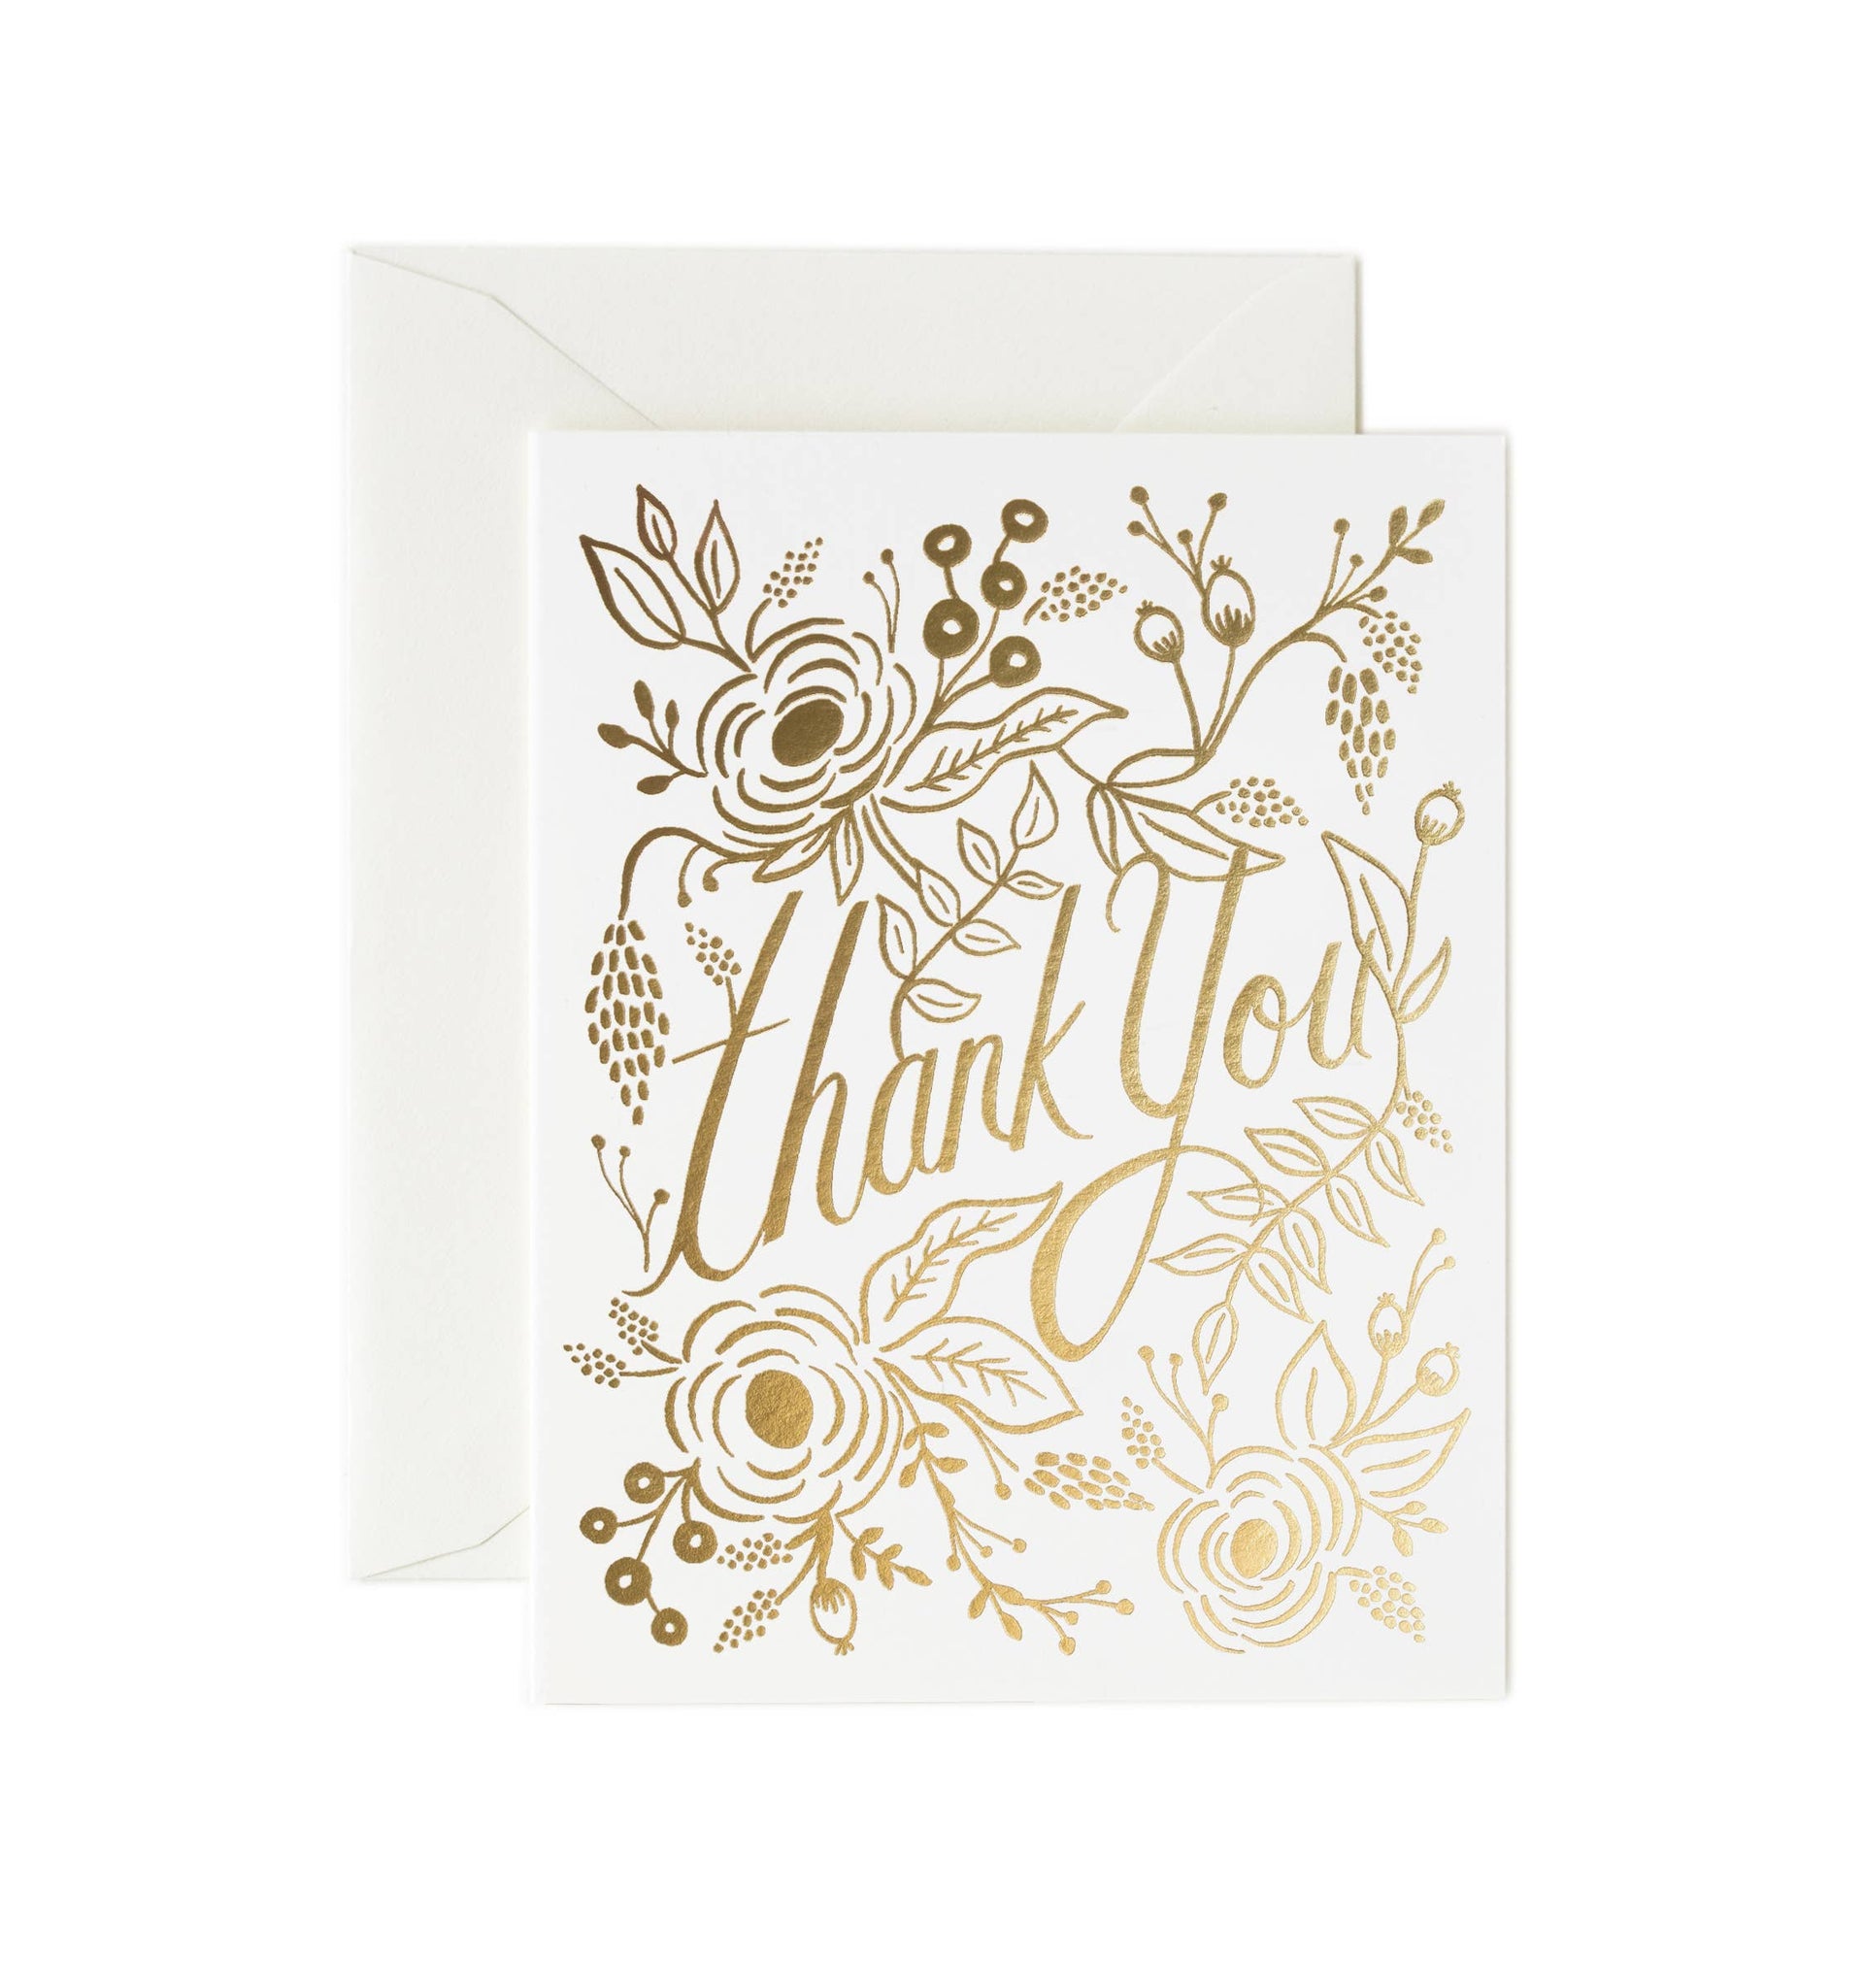 Boxed set of Marion Thank You cards